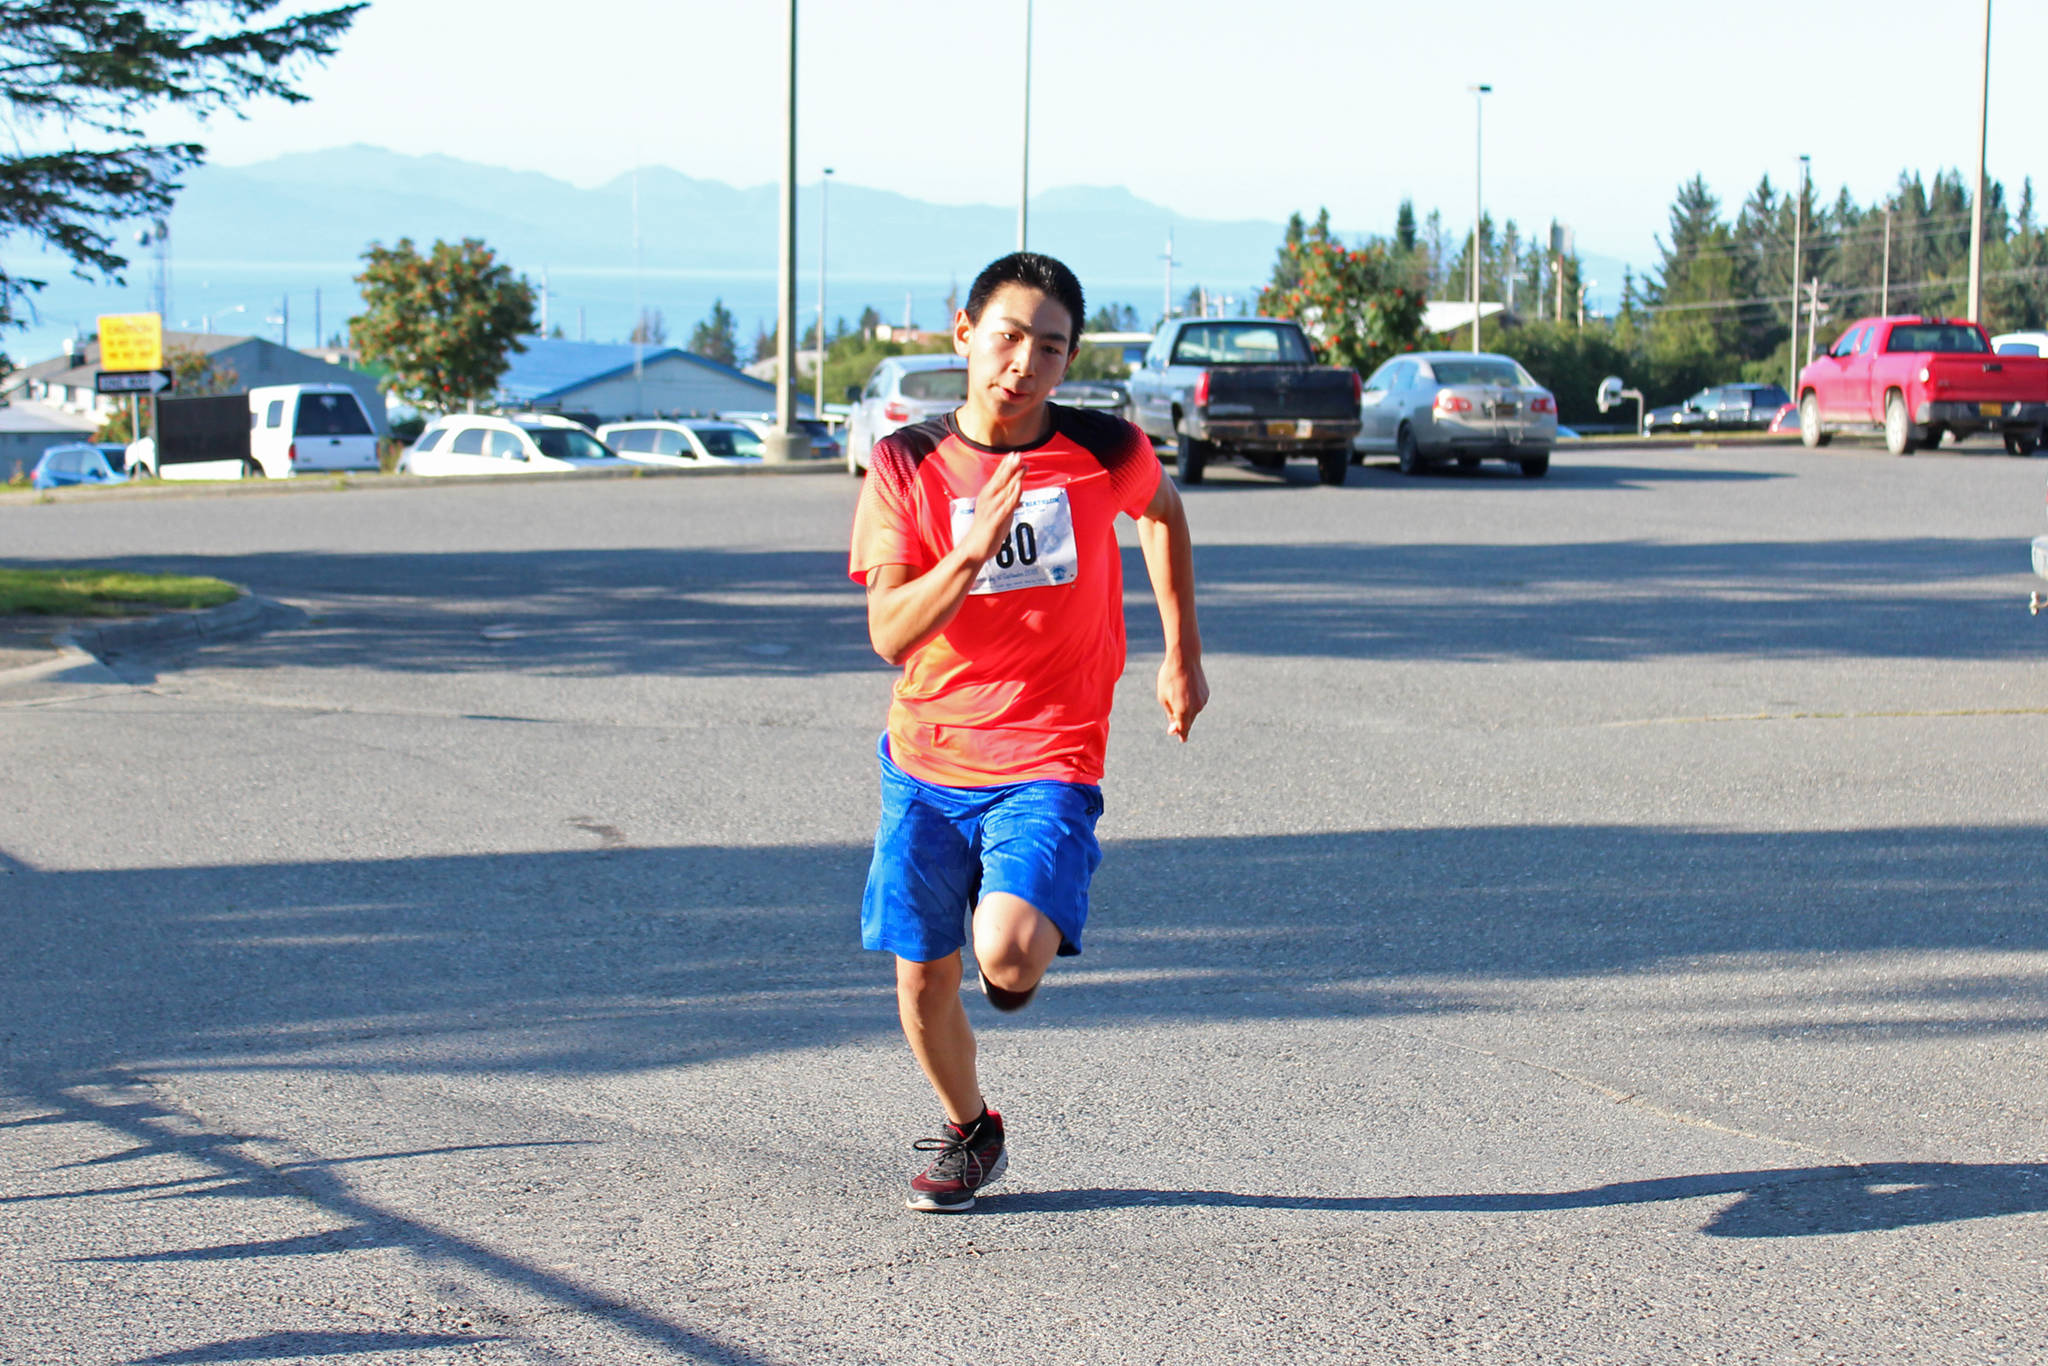 Skyler Rodriguez, a swimmer on the Homer High School swim and dive team, sprints to the finish line of the Homer Mariner Triathlon on Saturday, Sept. 1, 2018 at the high school in Homer, Alaska. (Photo by Megan Pacer/Homer News)